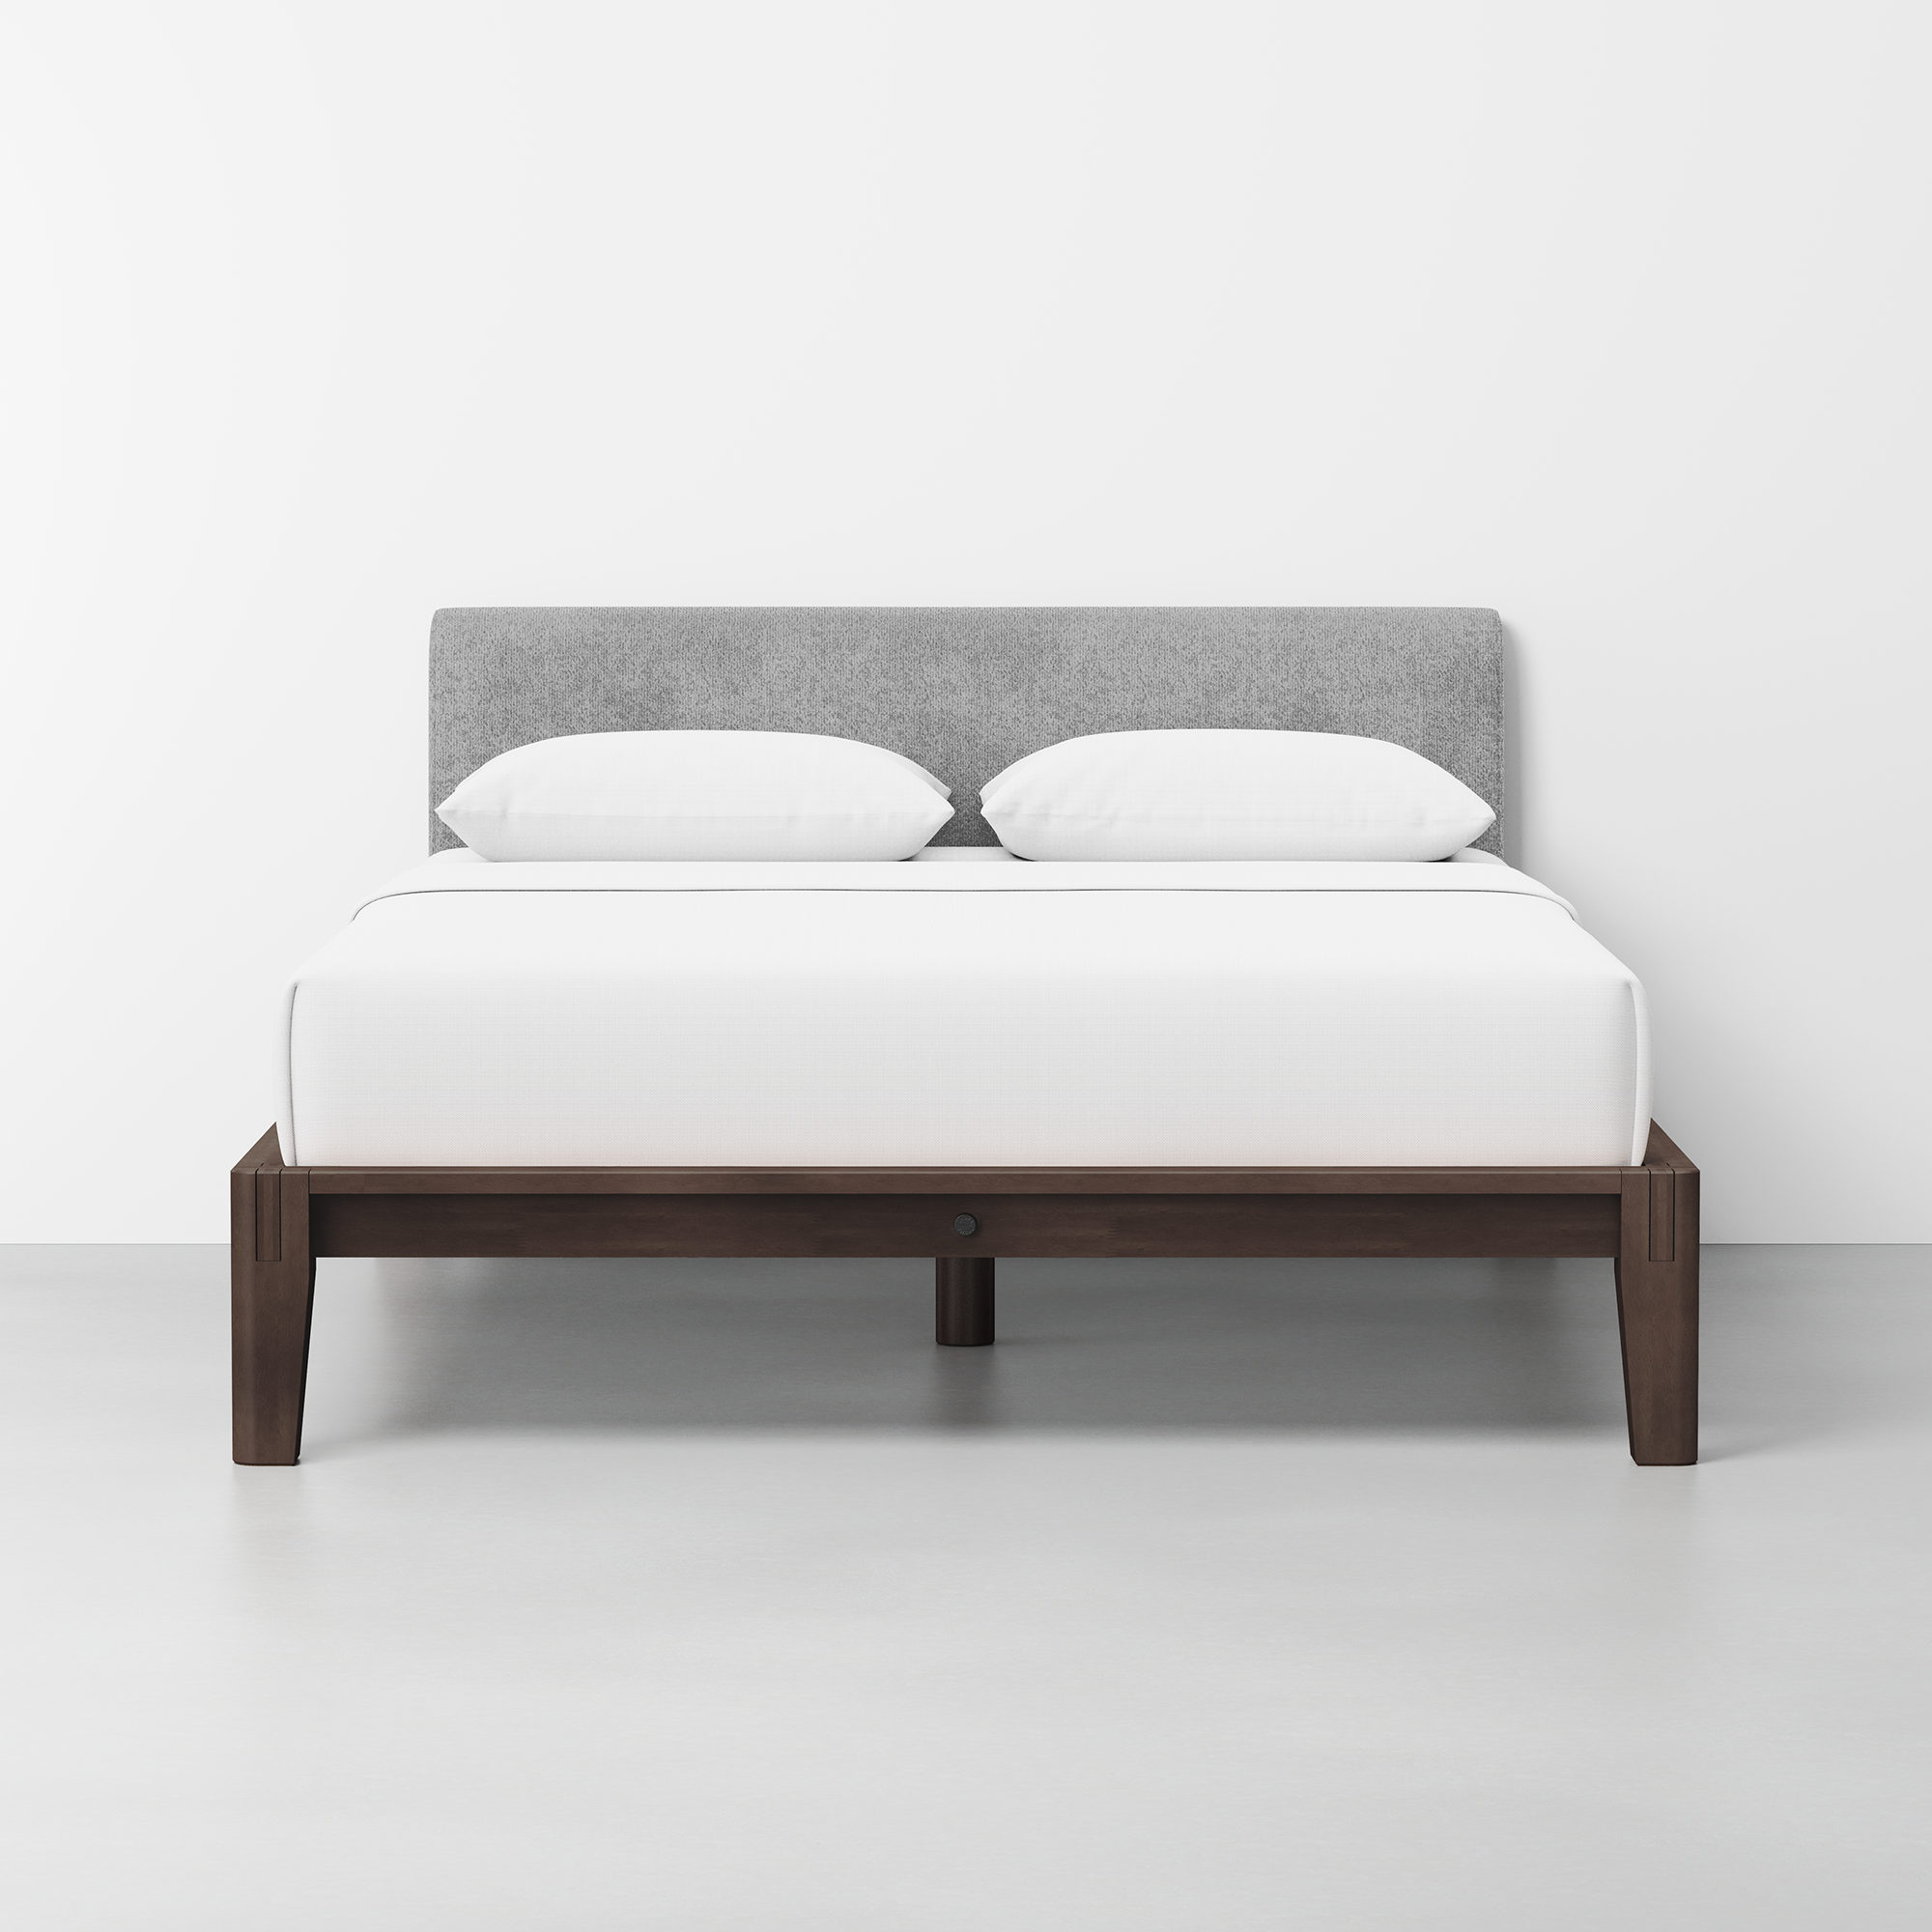 The Bed (Espresso / Pewter) - Render - Front